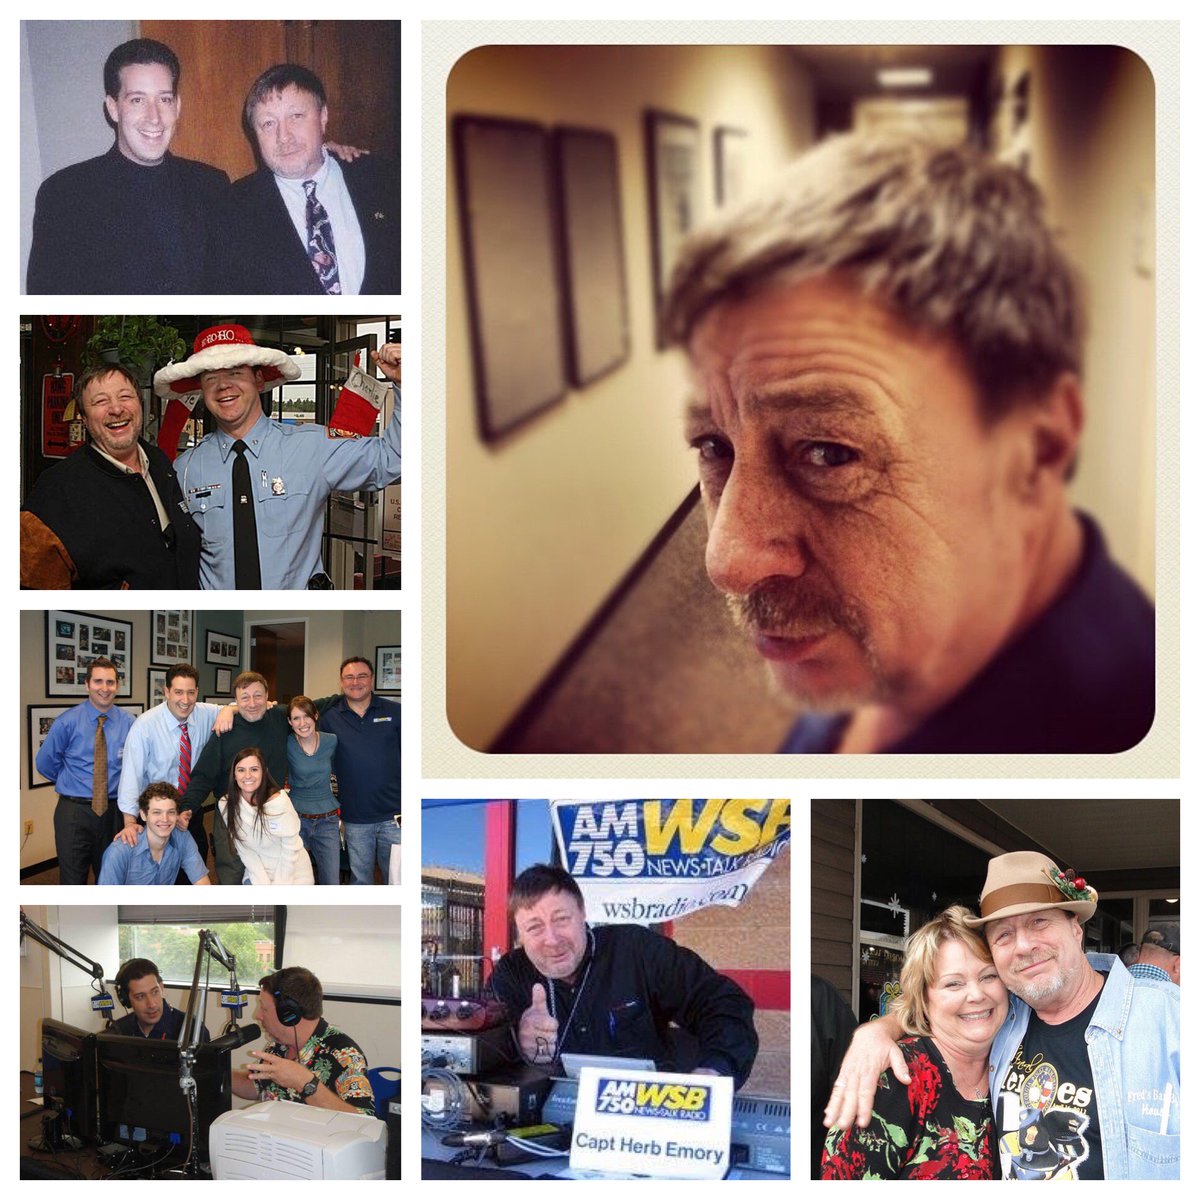 It is hard to believe but four years ago today I lost my mentor and friend and Atlanta lost an icon. We miss @CaptainHerbWSB every day. Please share your favorite Captain Herb memory. I'd love to read them today. #RememberingCaptainHerb